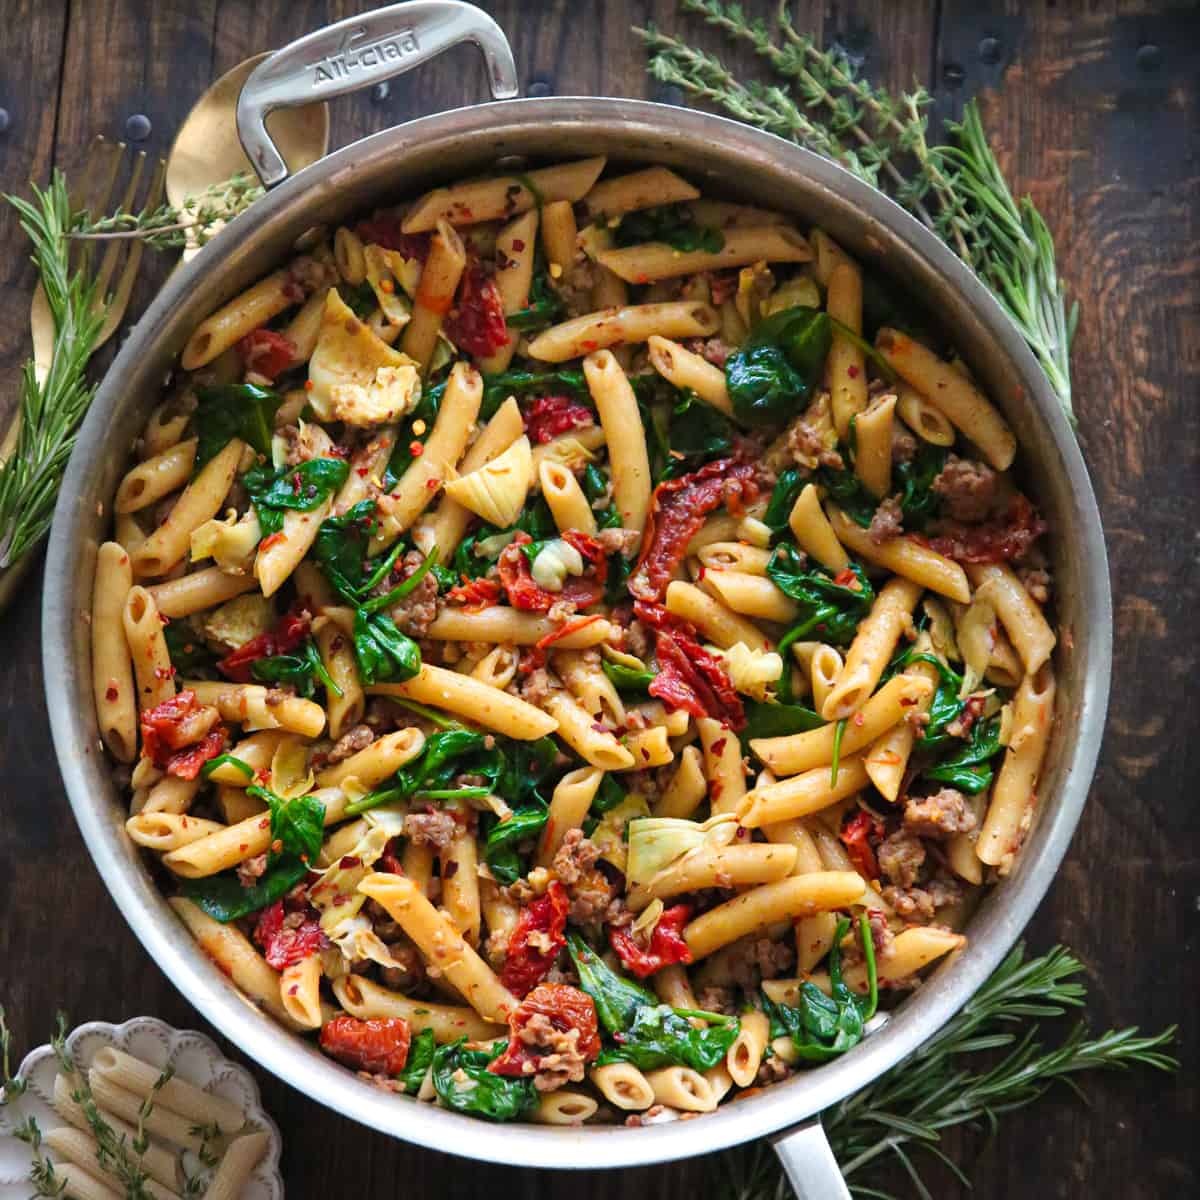 Italian Sausage Pasta with Spinach, Artichokes, and Sun-Dried Tomatoes - in a stainless steel skillet.